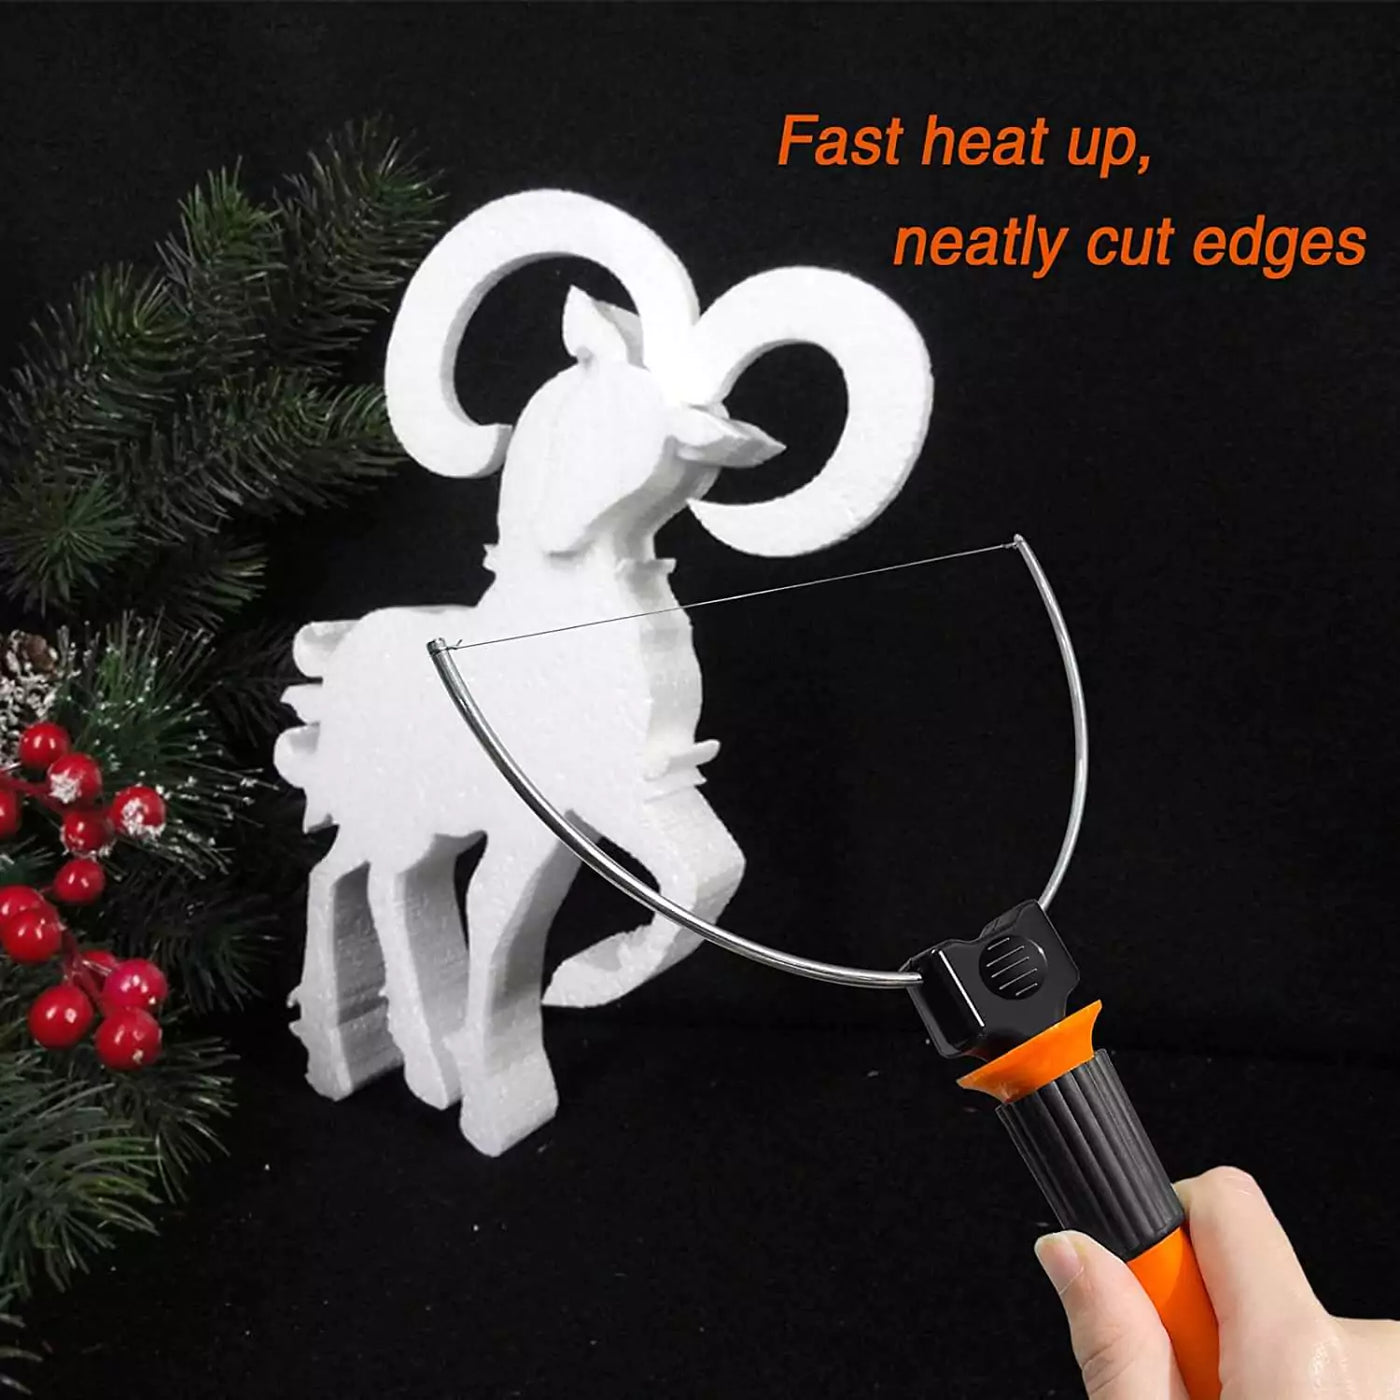  HARDELL 3 in 1 Foam Cutter Electric Styrofoam Cutting Tool, Hot  Wire Foam Cutter kit, Hot Knife Foam Cutter With Cleaning Brush for DIY &  Christmas Gift : Arts, Crafts & Sewing